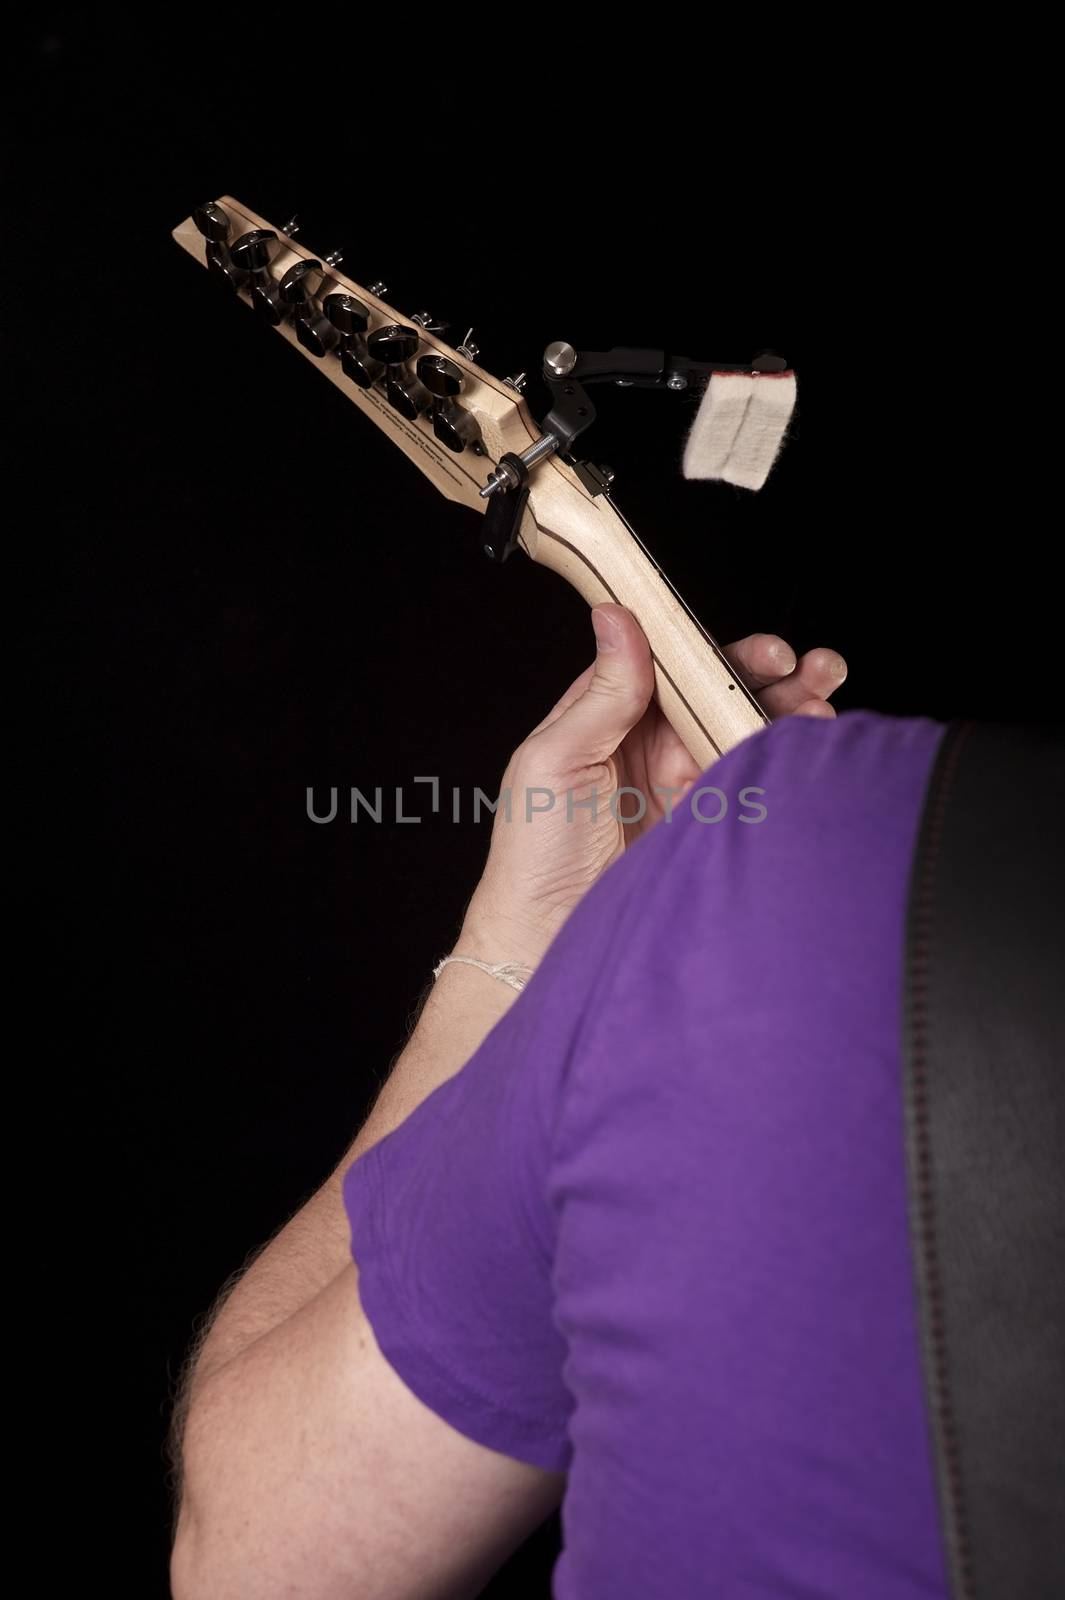 Guitar Play. Vertical Photo of the Guitar Player. His Shoulder, Hand and the Guitar. Solid Black Background.